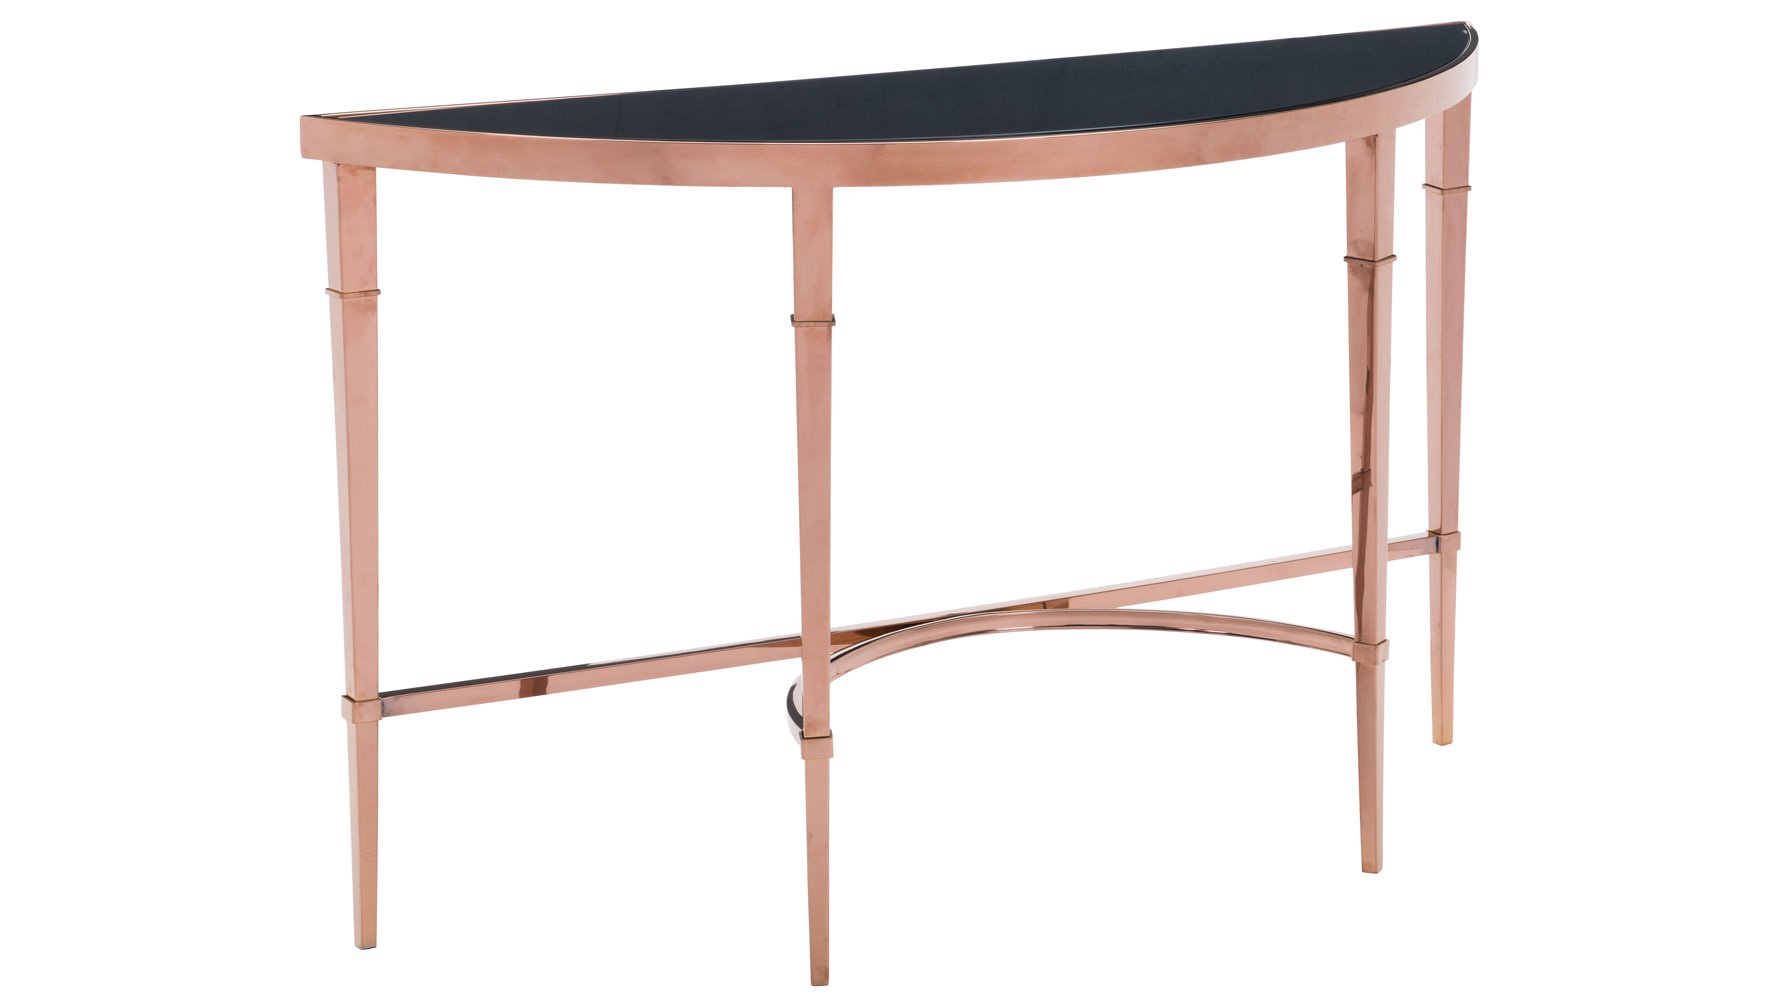 modern pascale glass console table rose gold black zuri furniture and accent leather dining room chairs drummer stool with backrest nursery changing circular patio cover curved